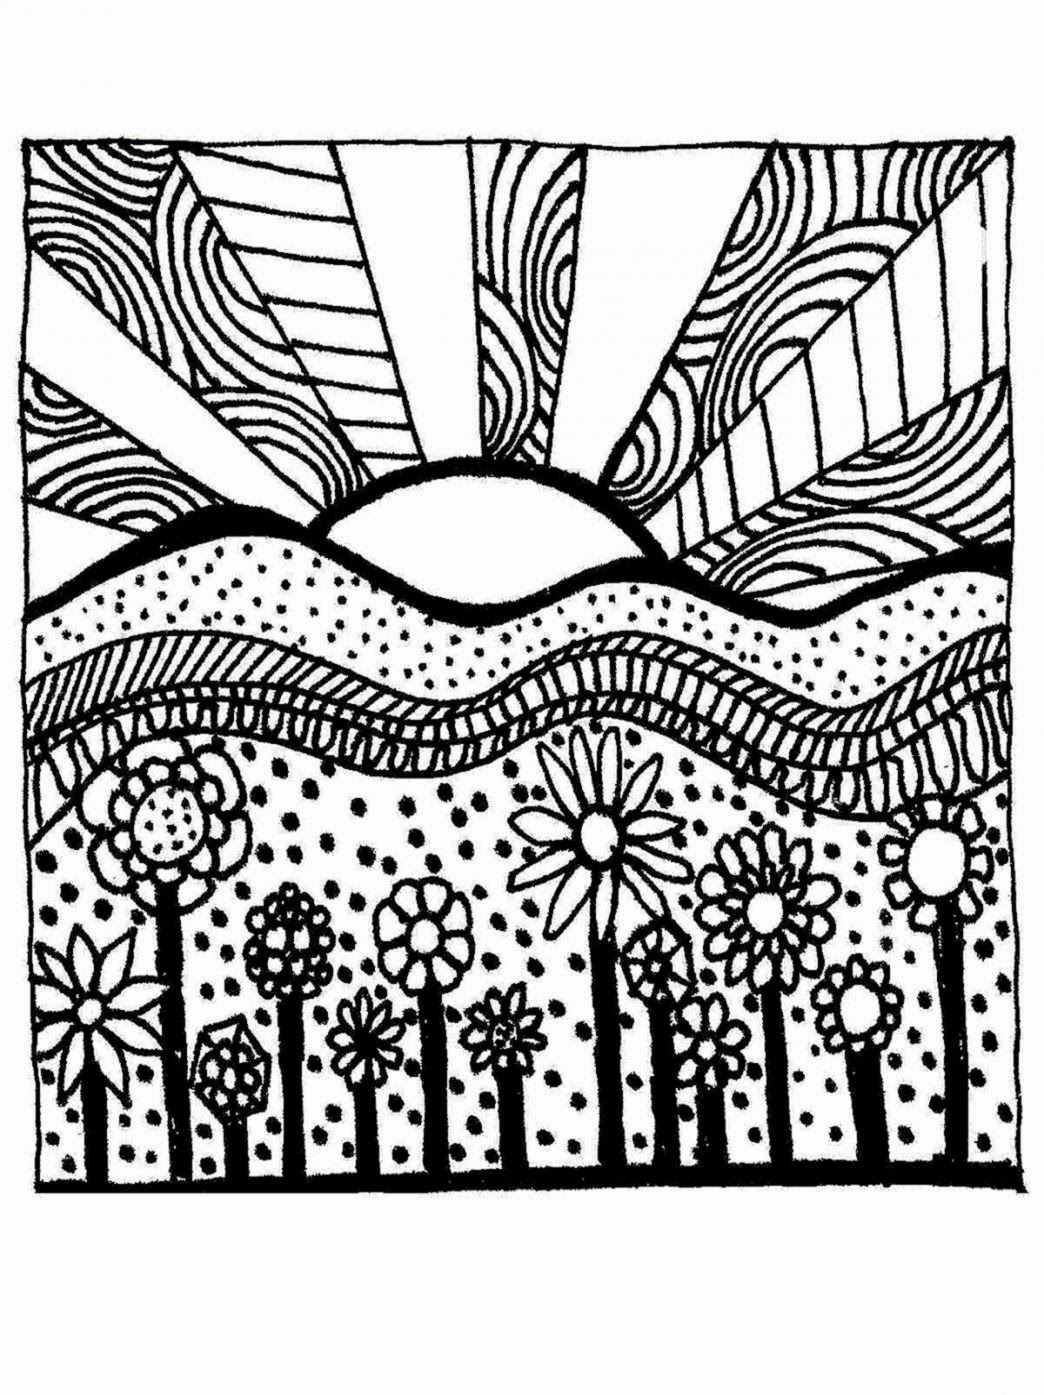 Printable Coloring Pages For Adults Free Coloring Sheet Coloring Wallpapers Download Free Images Wallpaper [coloring654.blogspot.com]